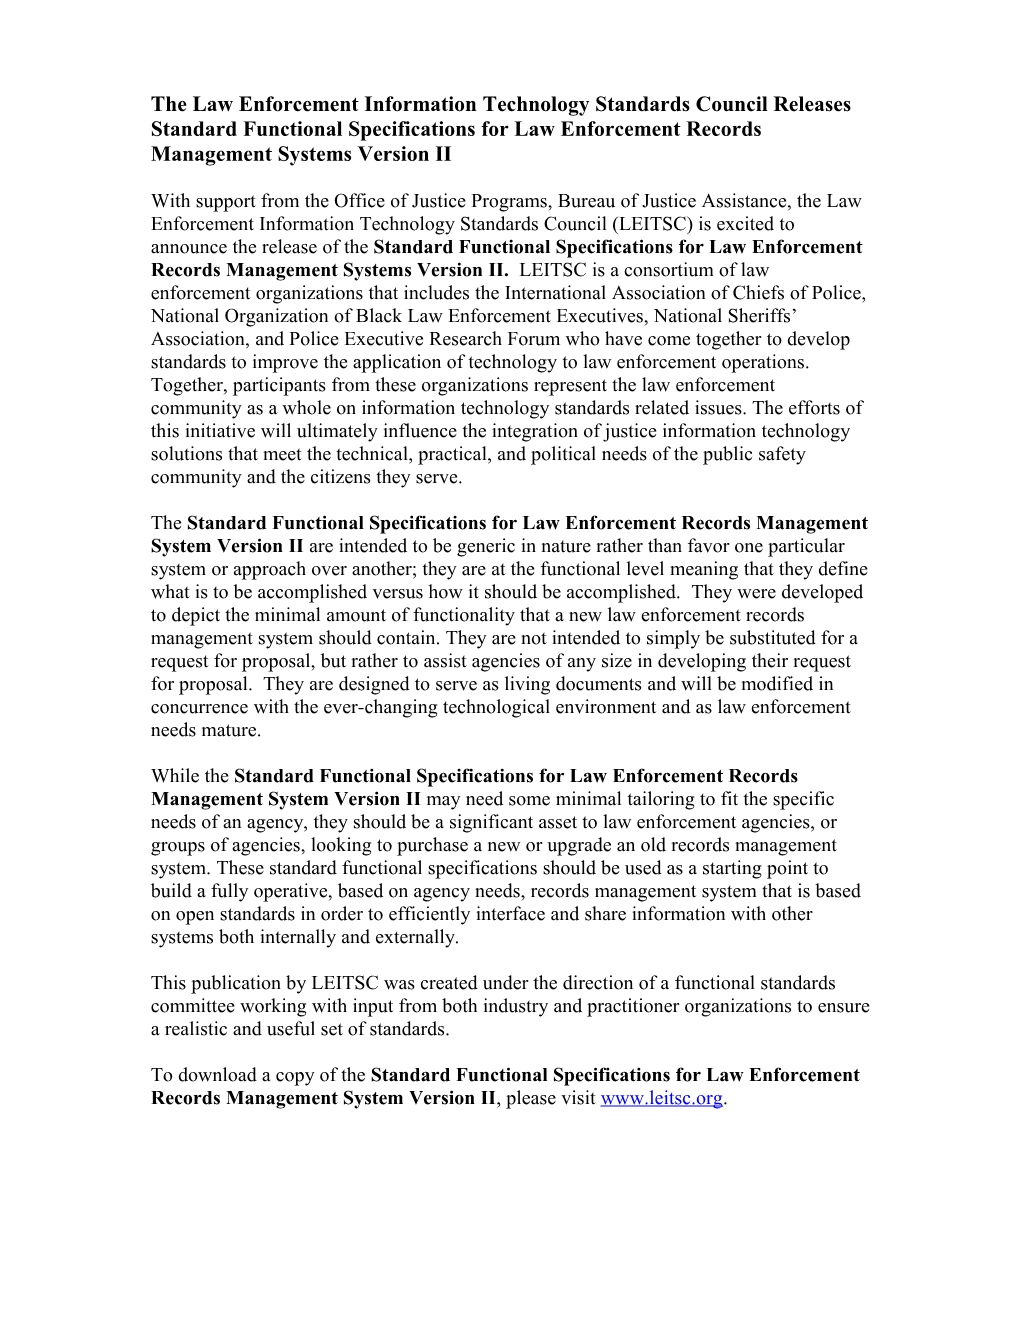 The Law Enforcement Information Technology Standards Council Releases Standard Functional